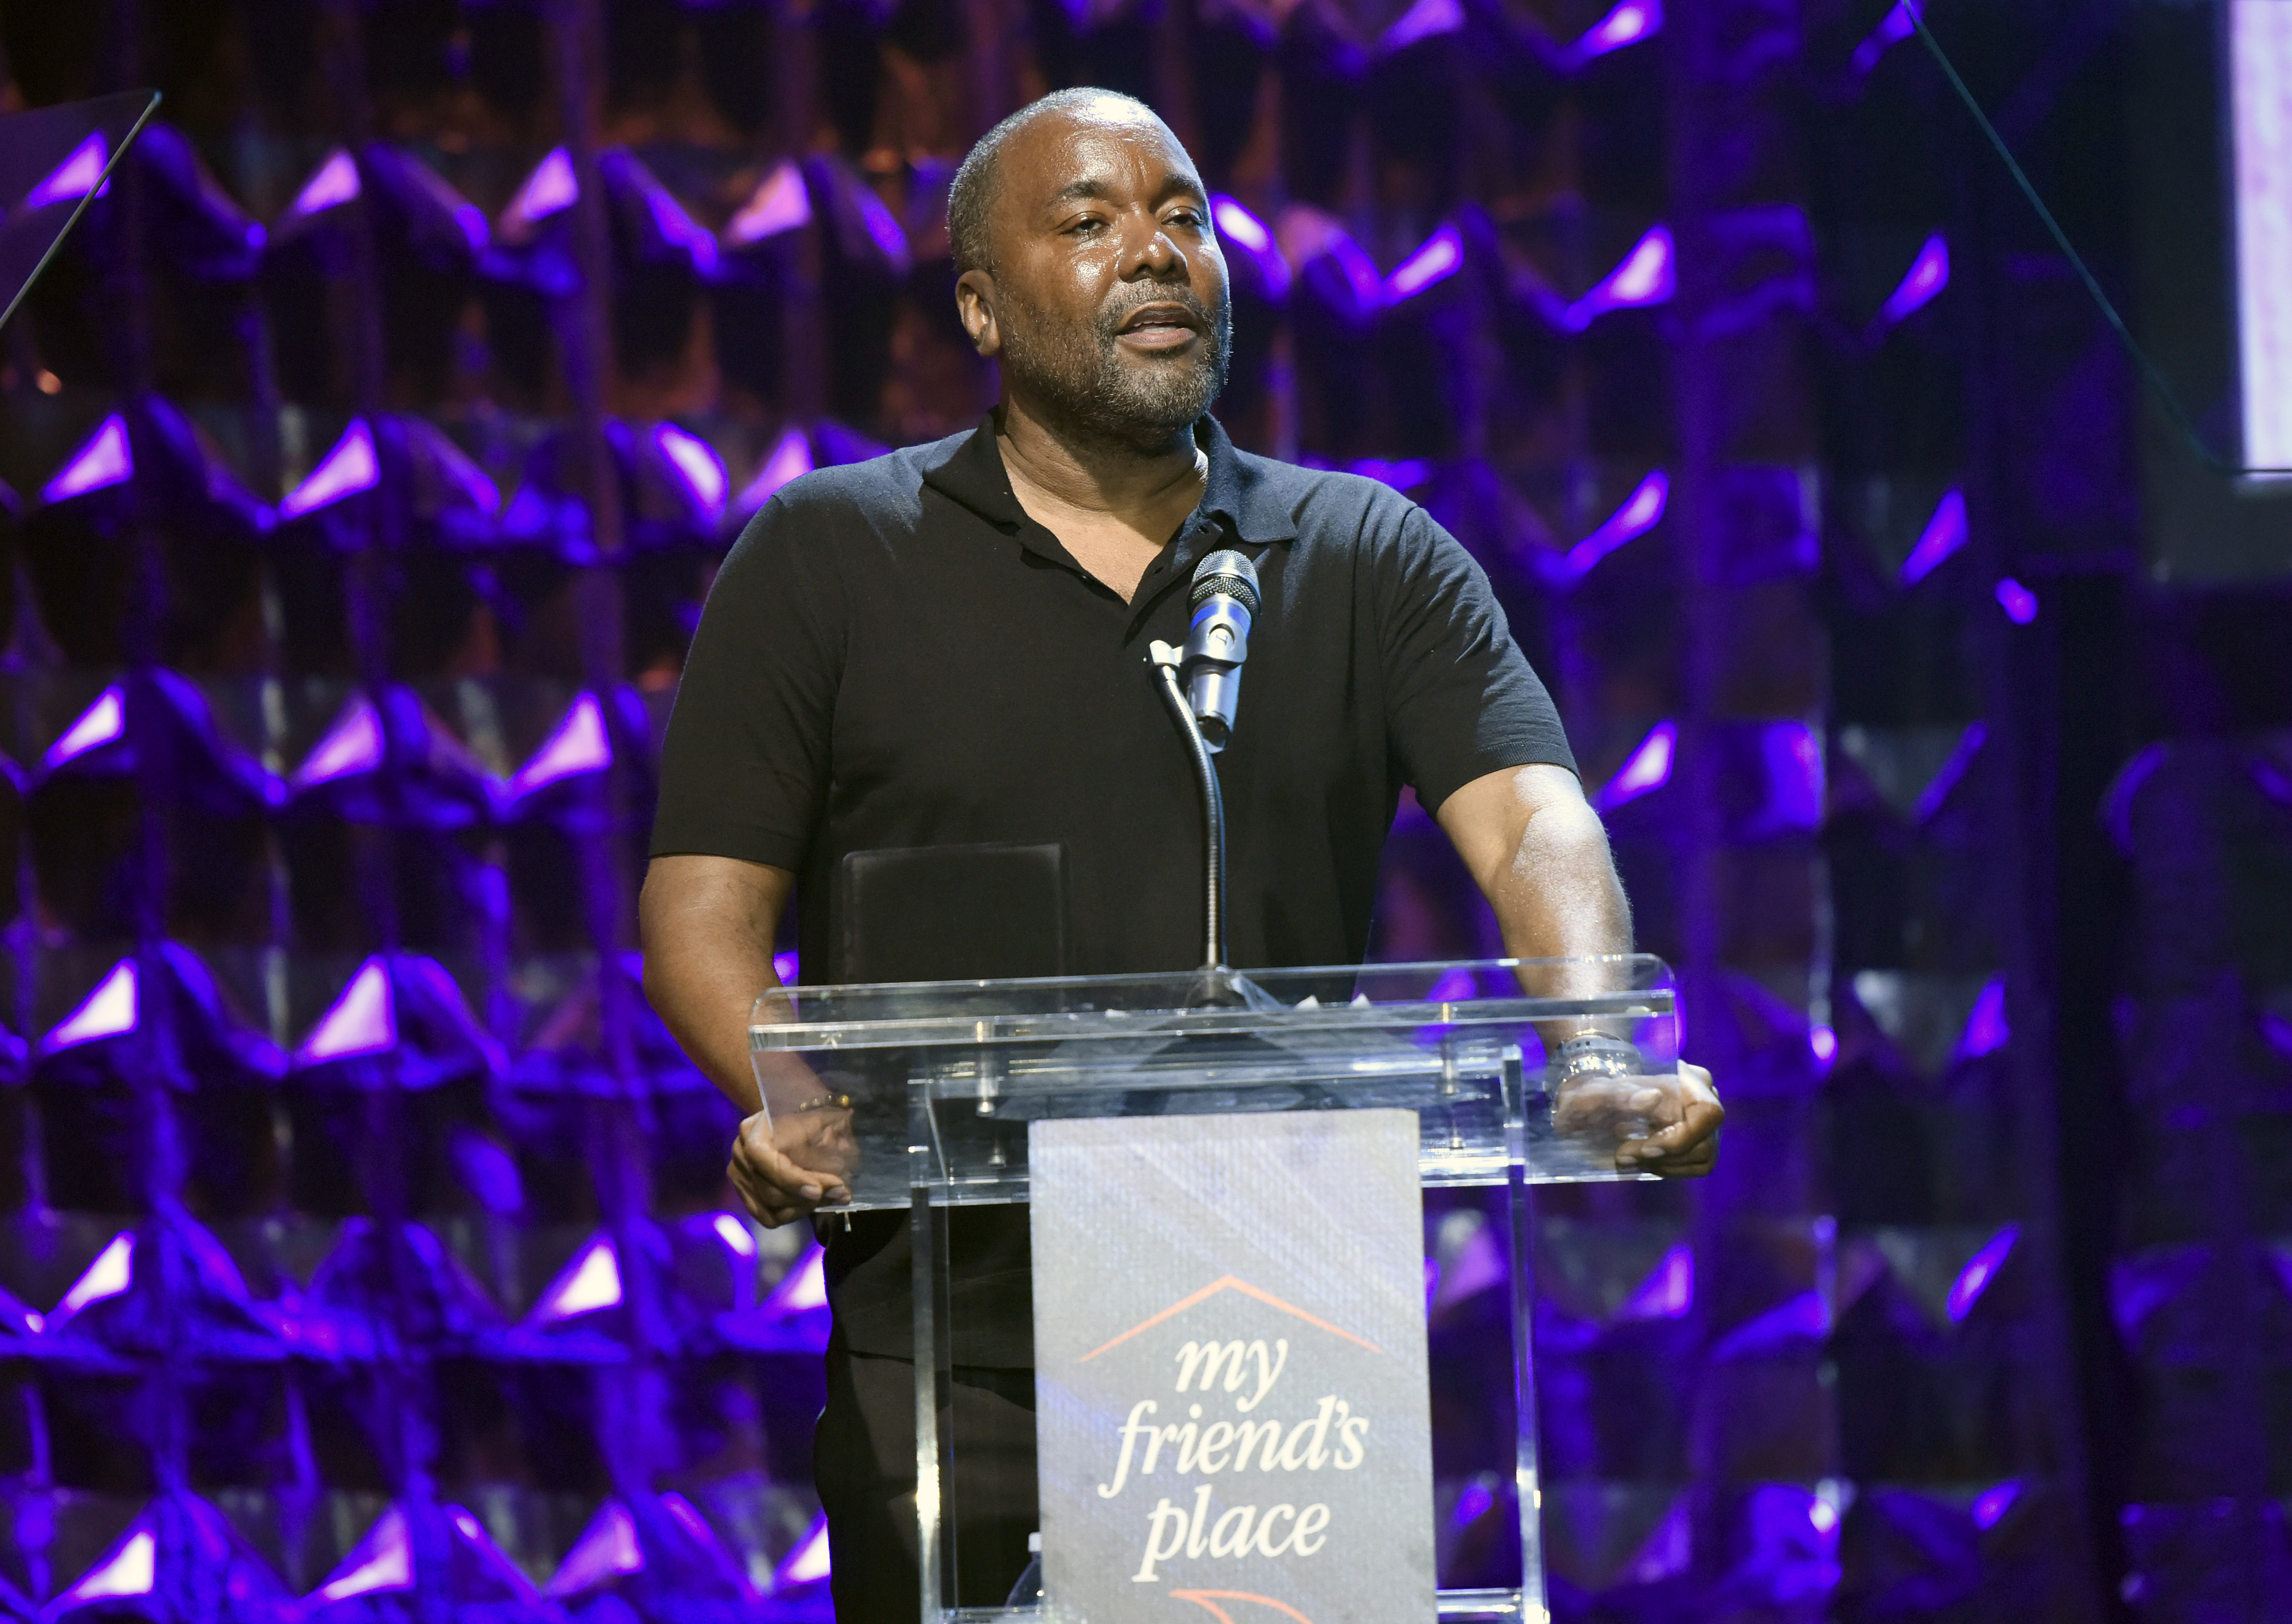 Honoree Lee Daniels speaks onstage at Ending Youth Homelessness: A Benefit for My Friend's Place at Hollywood Palladium on April 06, 2019 in Los Angeles, California. (Photo by Vivien Killilea/Getty Images for My Friend's Place)